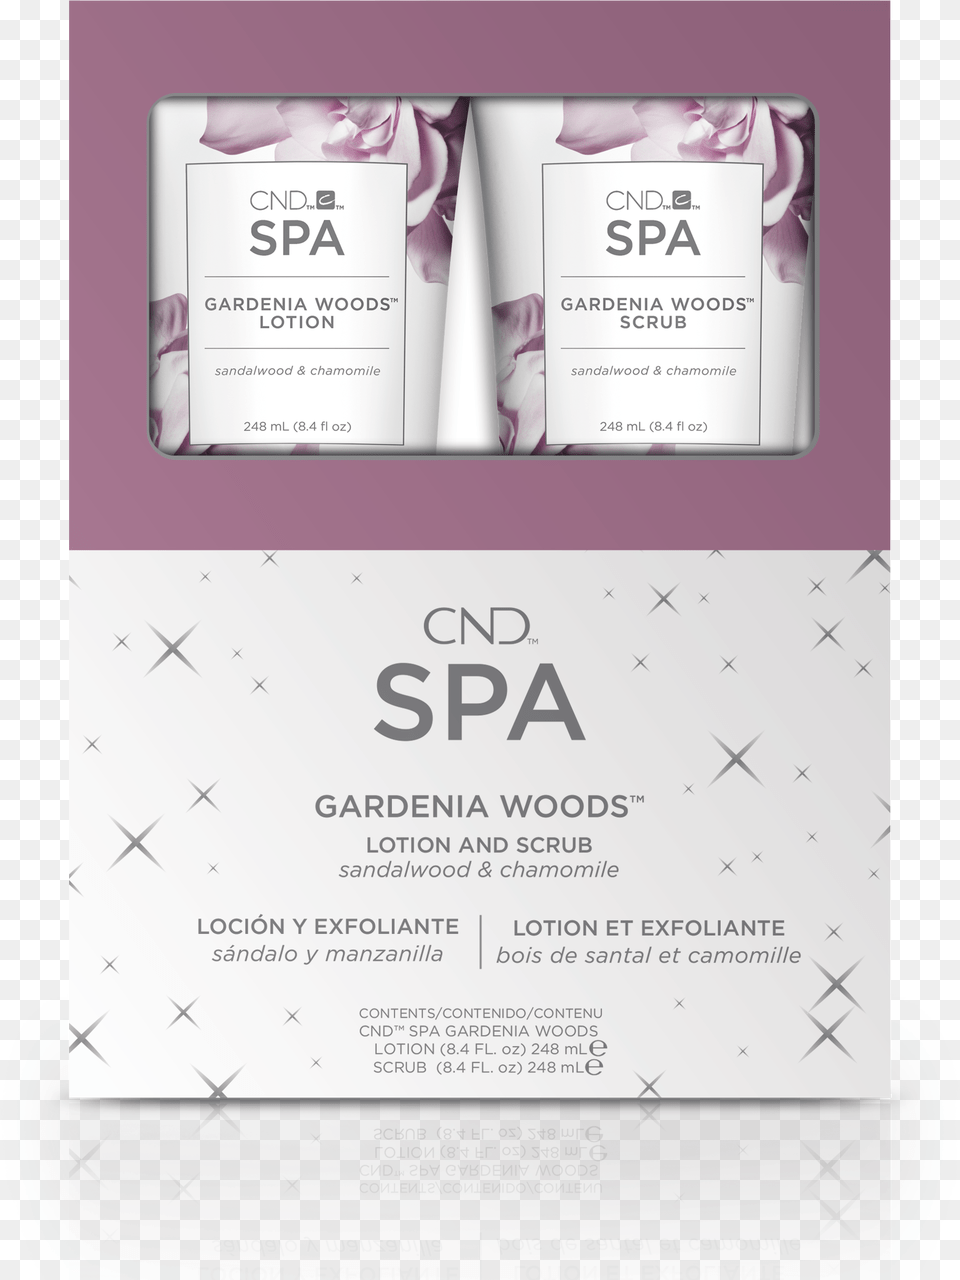 Cnd Spa Gardenia Woods Duo Set Bar Soap, Advertisement, Poster Png Image